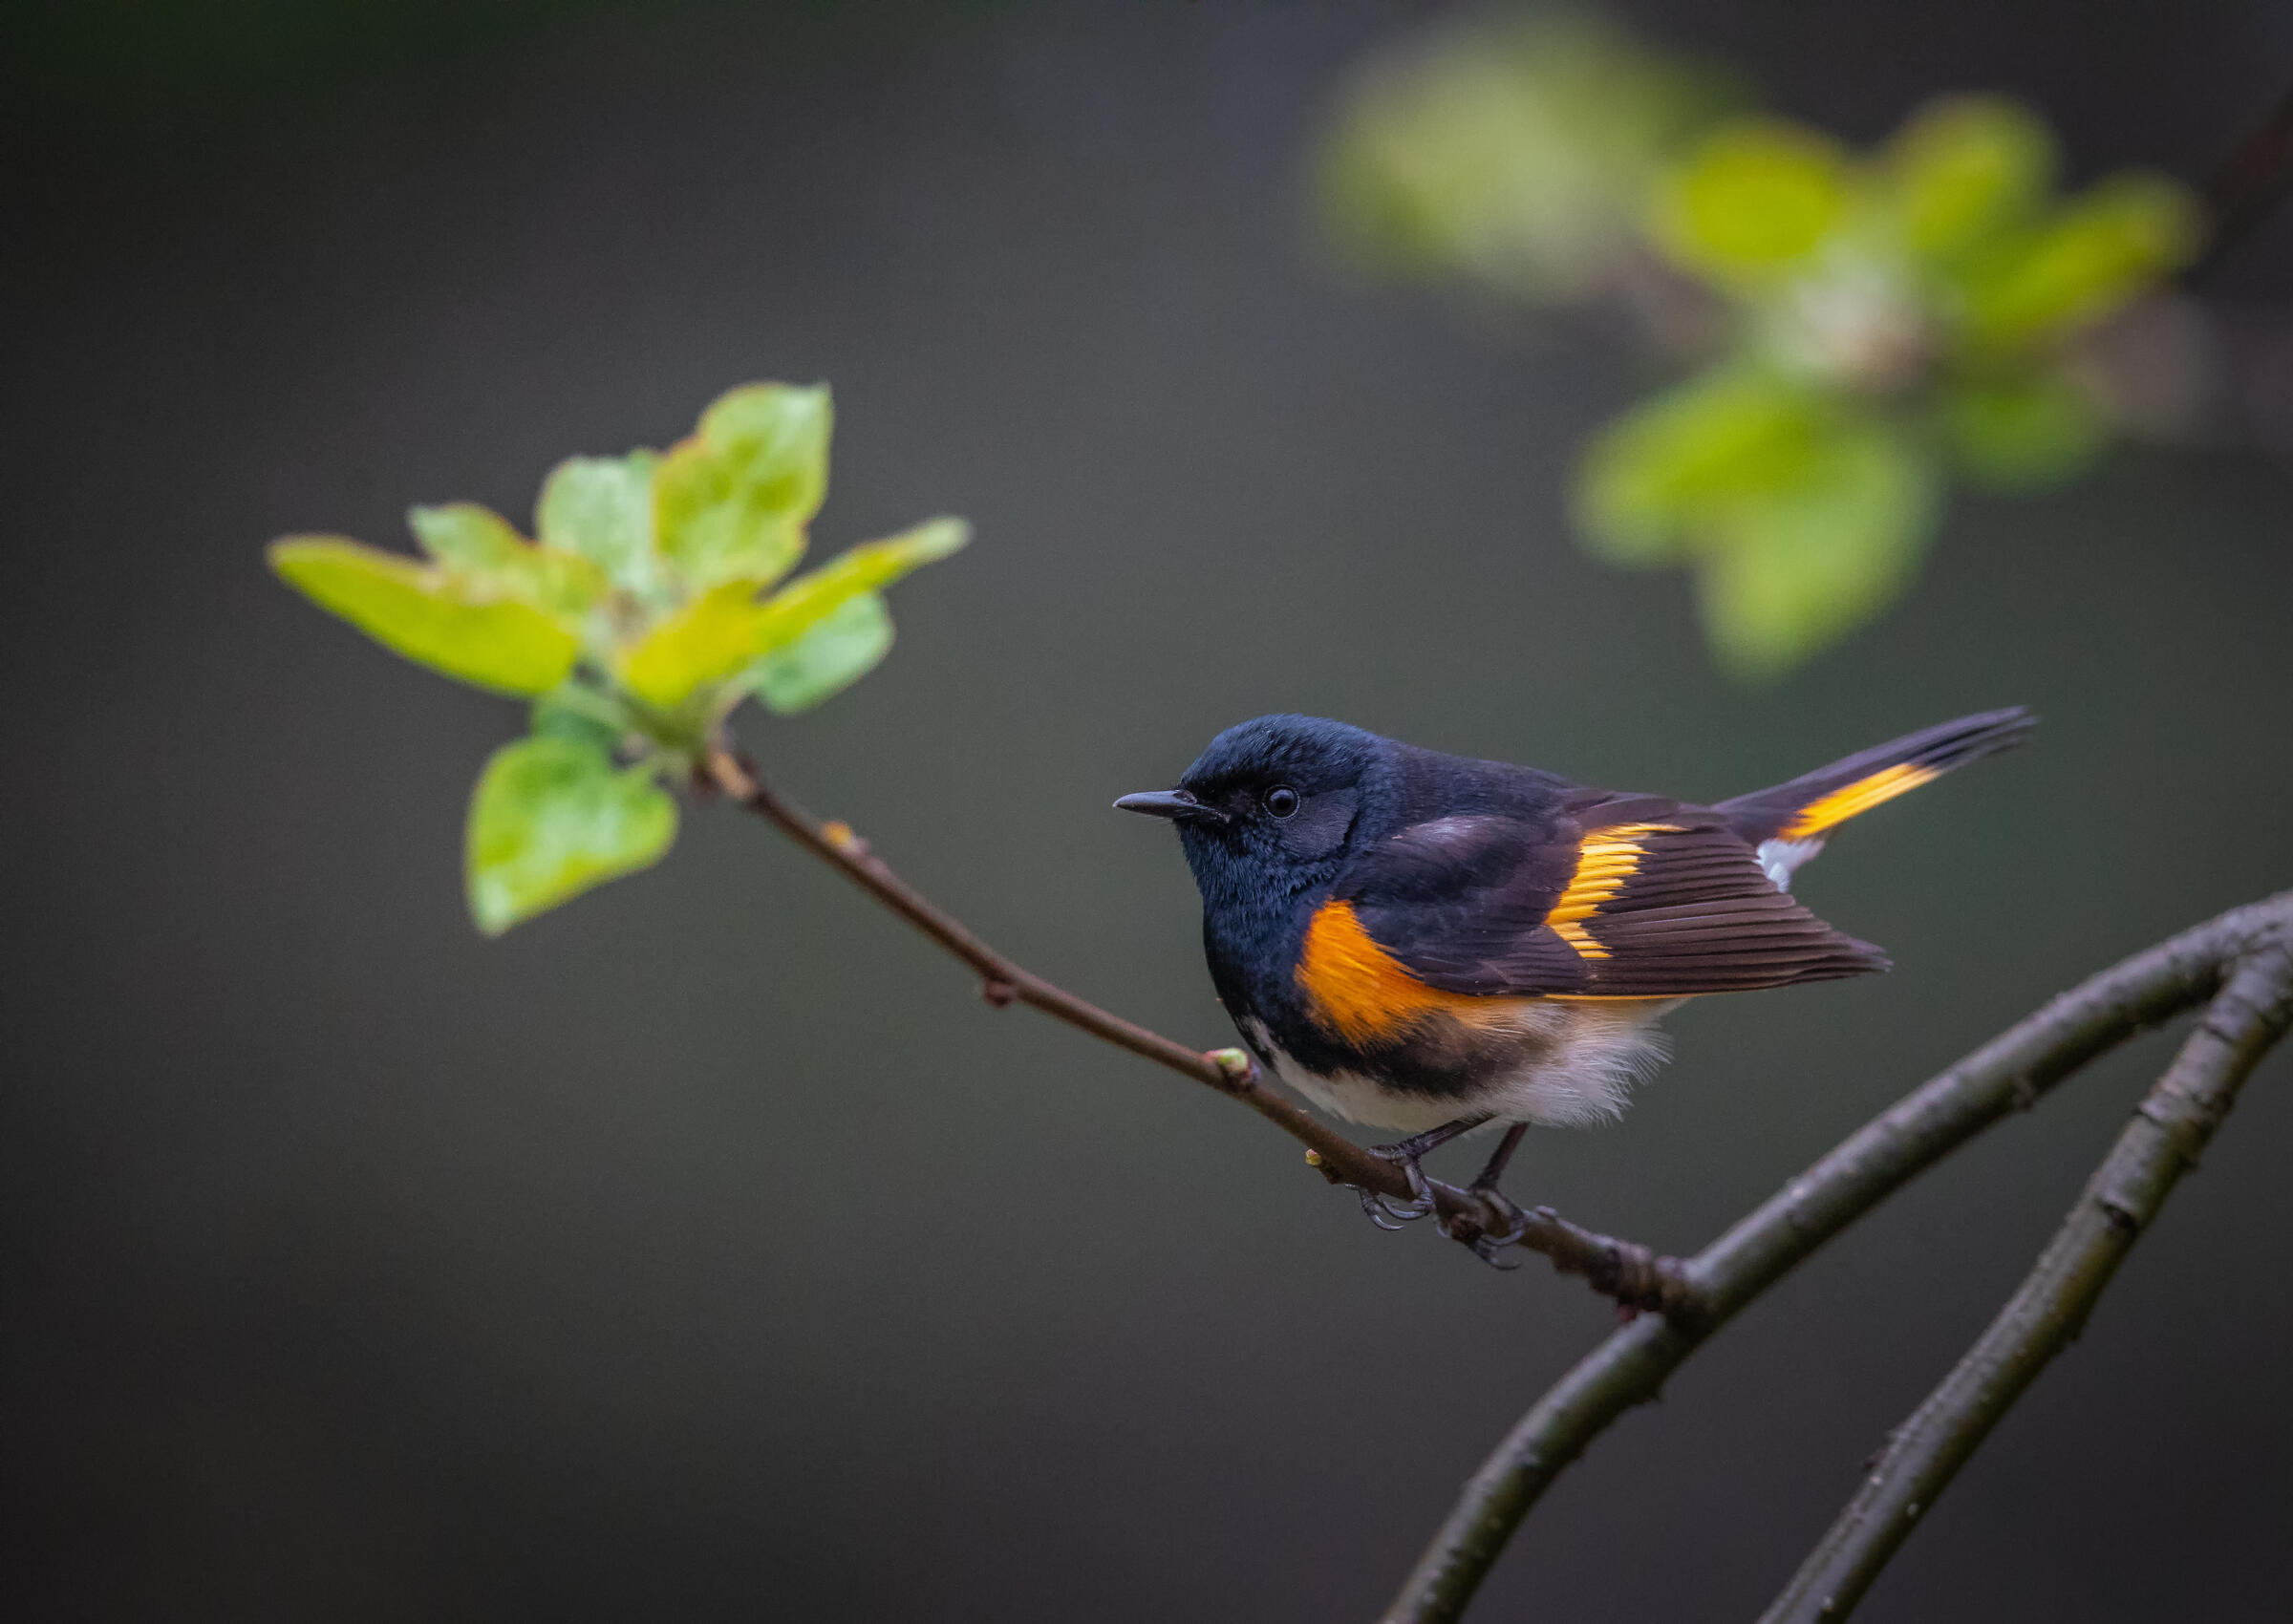 A small songbird in a forest